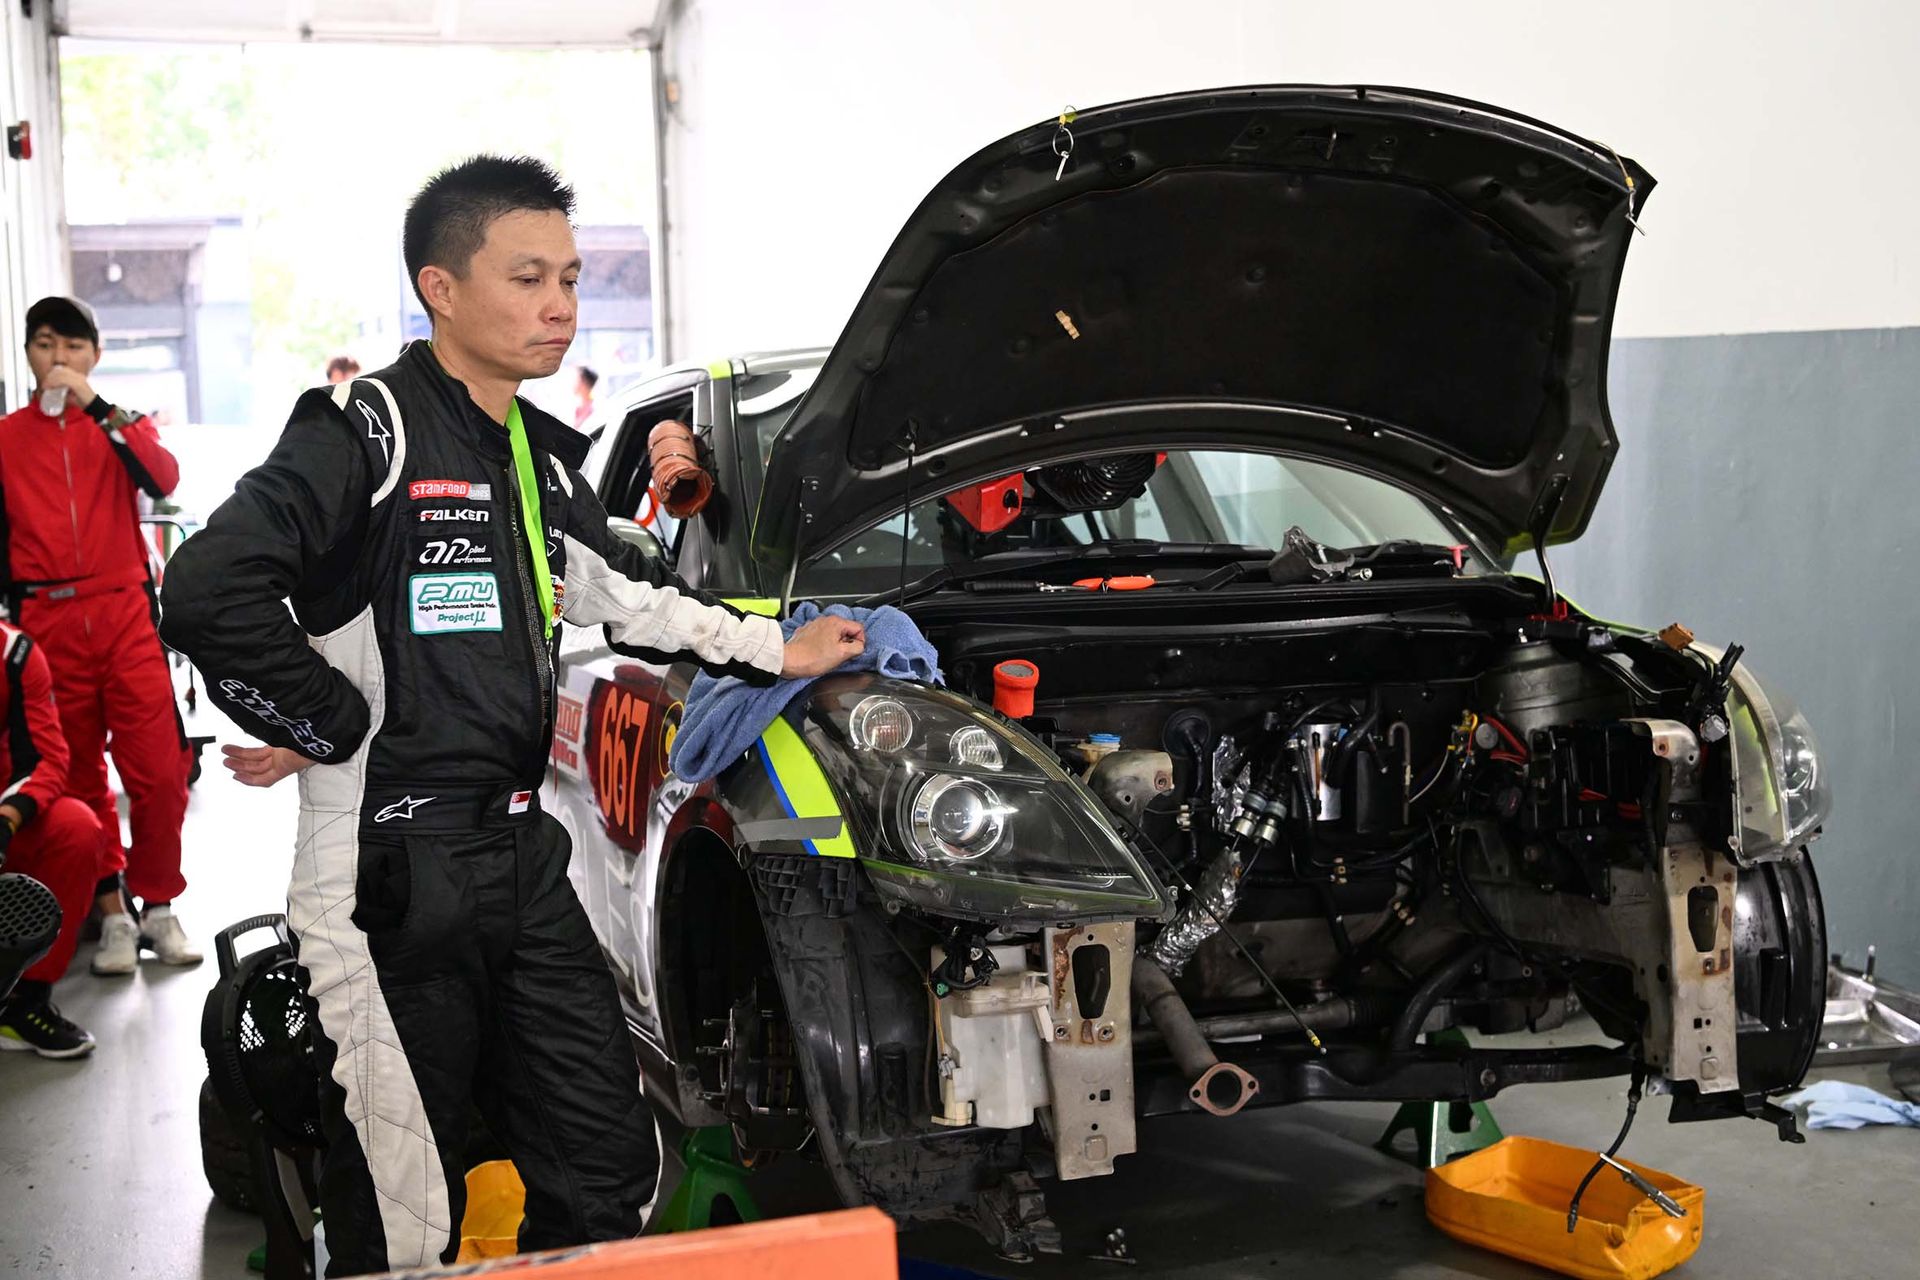 Mr Chester Chua, chief mechanic and strategist of Team 667, awaiting a replacement engine for the Suzuki Swift Sport that overheated less than two hours into the nine-hour race.